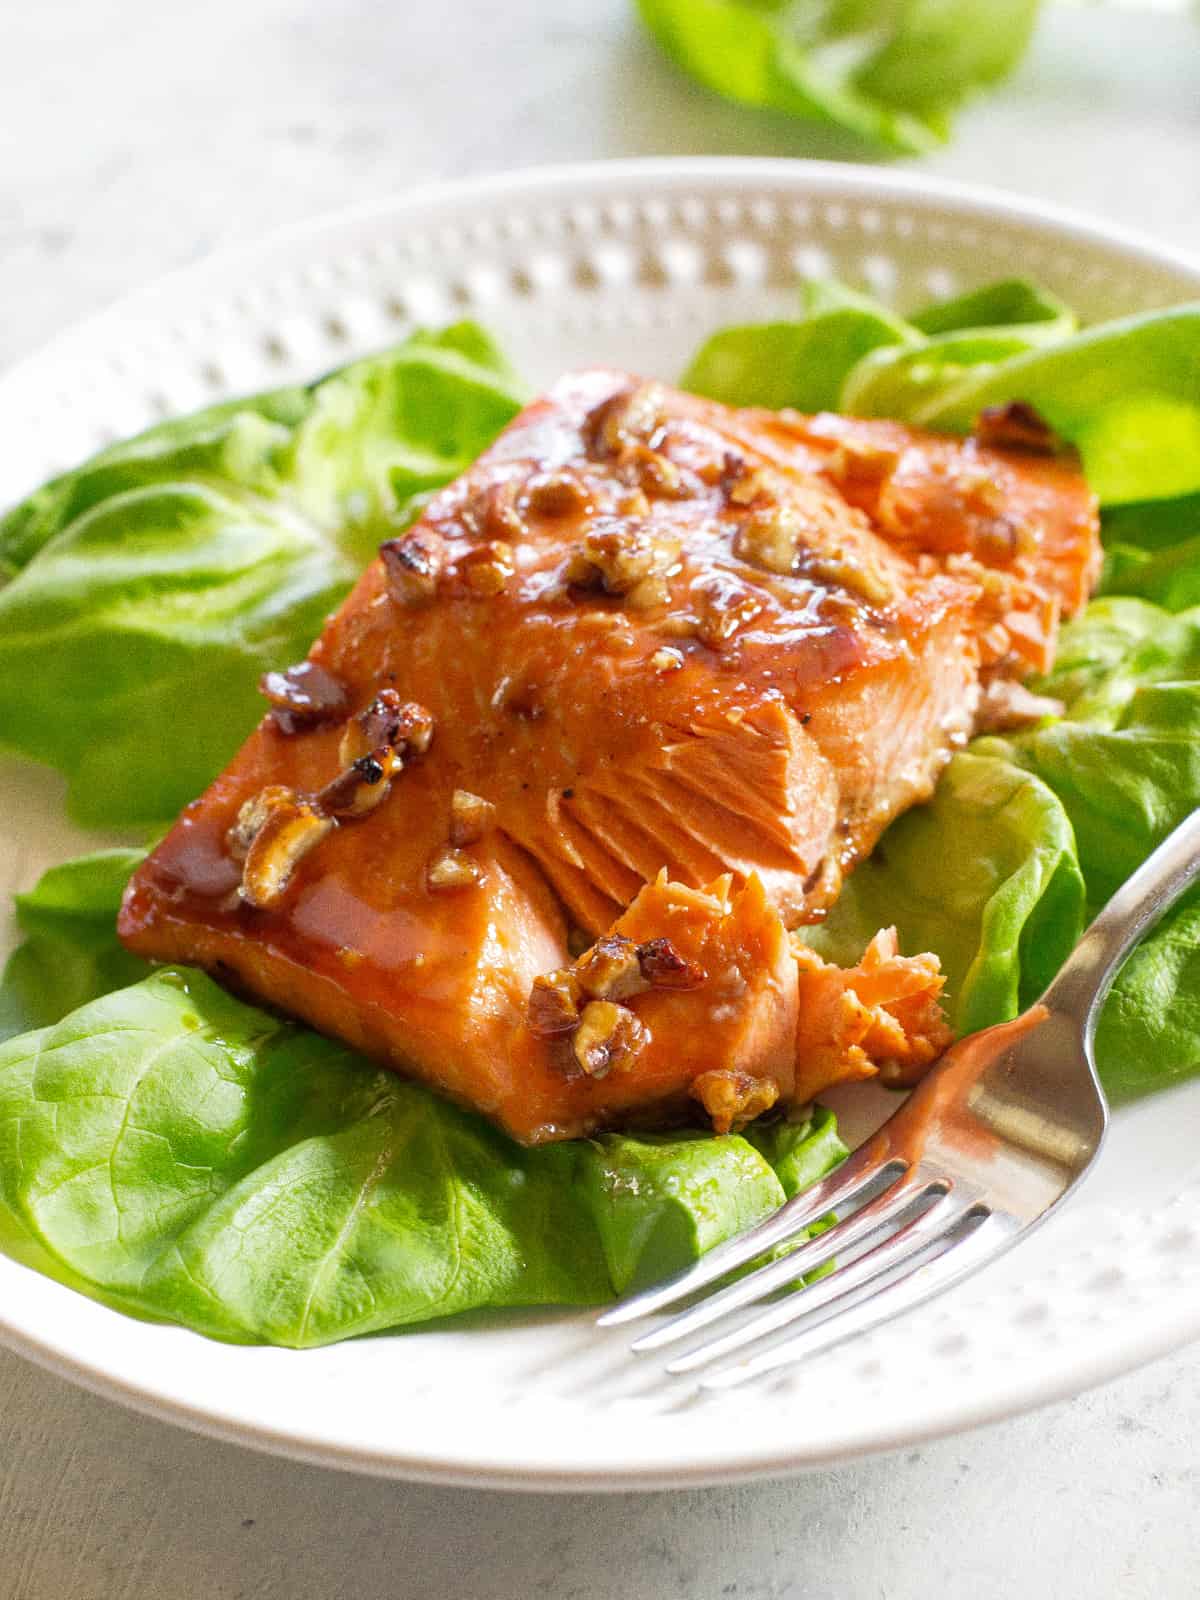 Pecan and Honey Glazed Salmon Recipe - The Girl Who Ate Everything